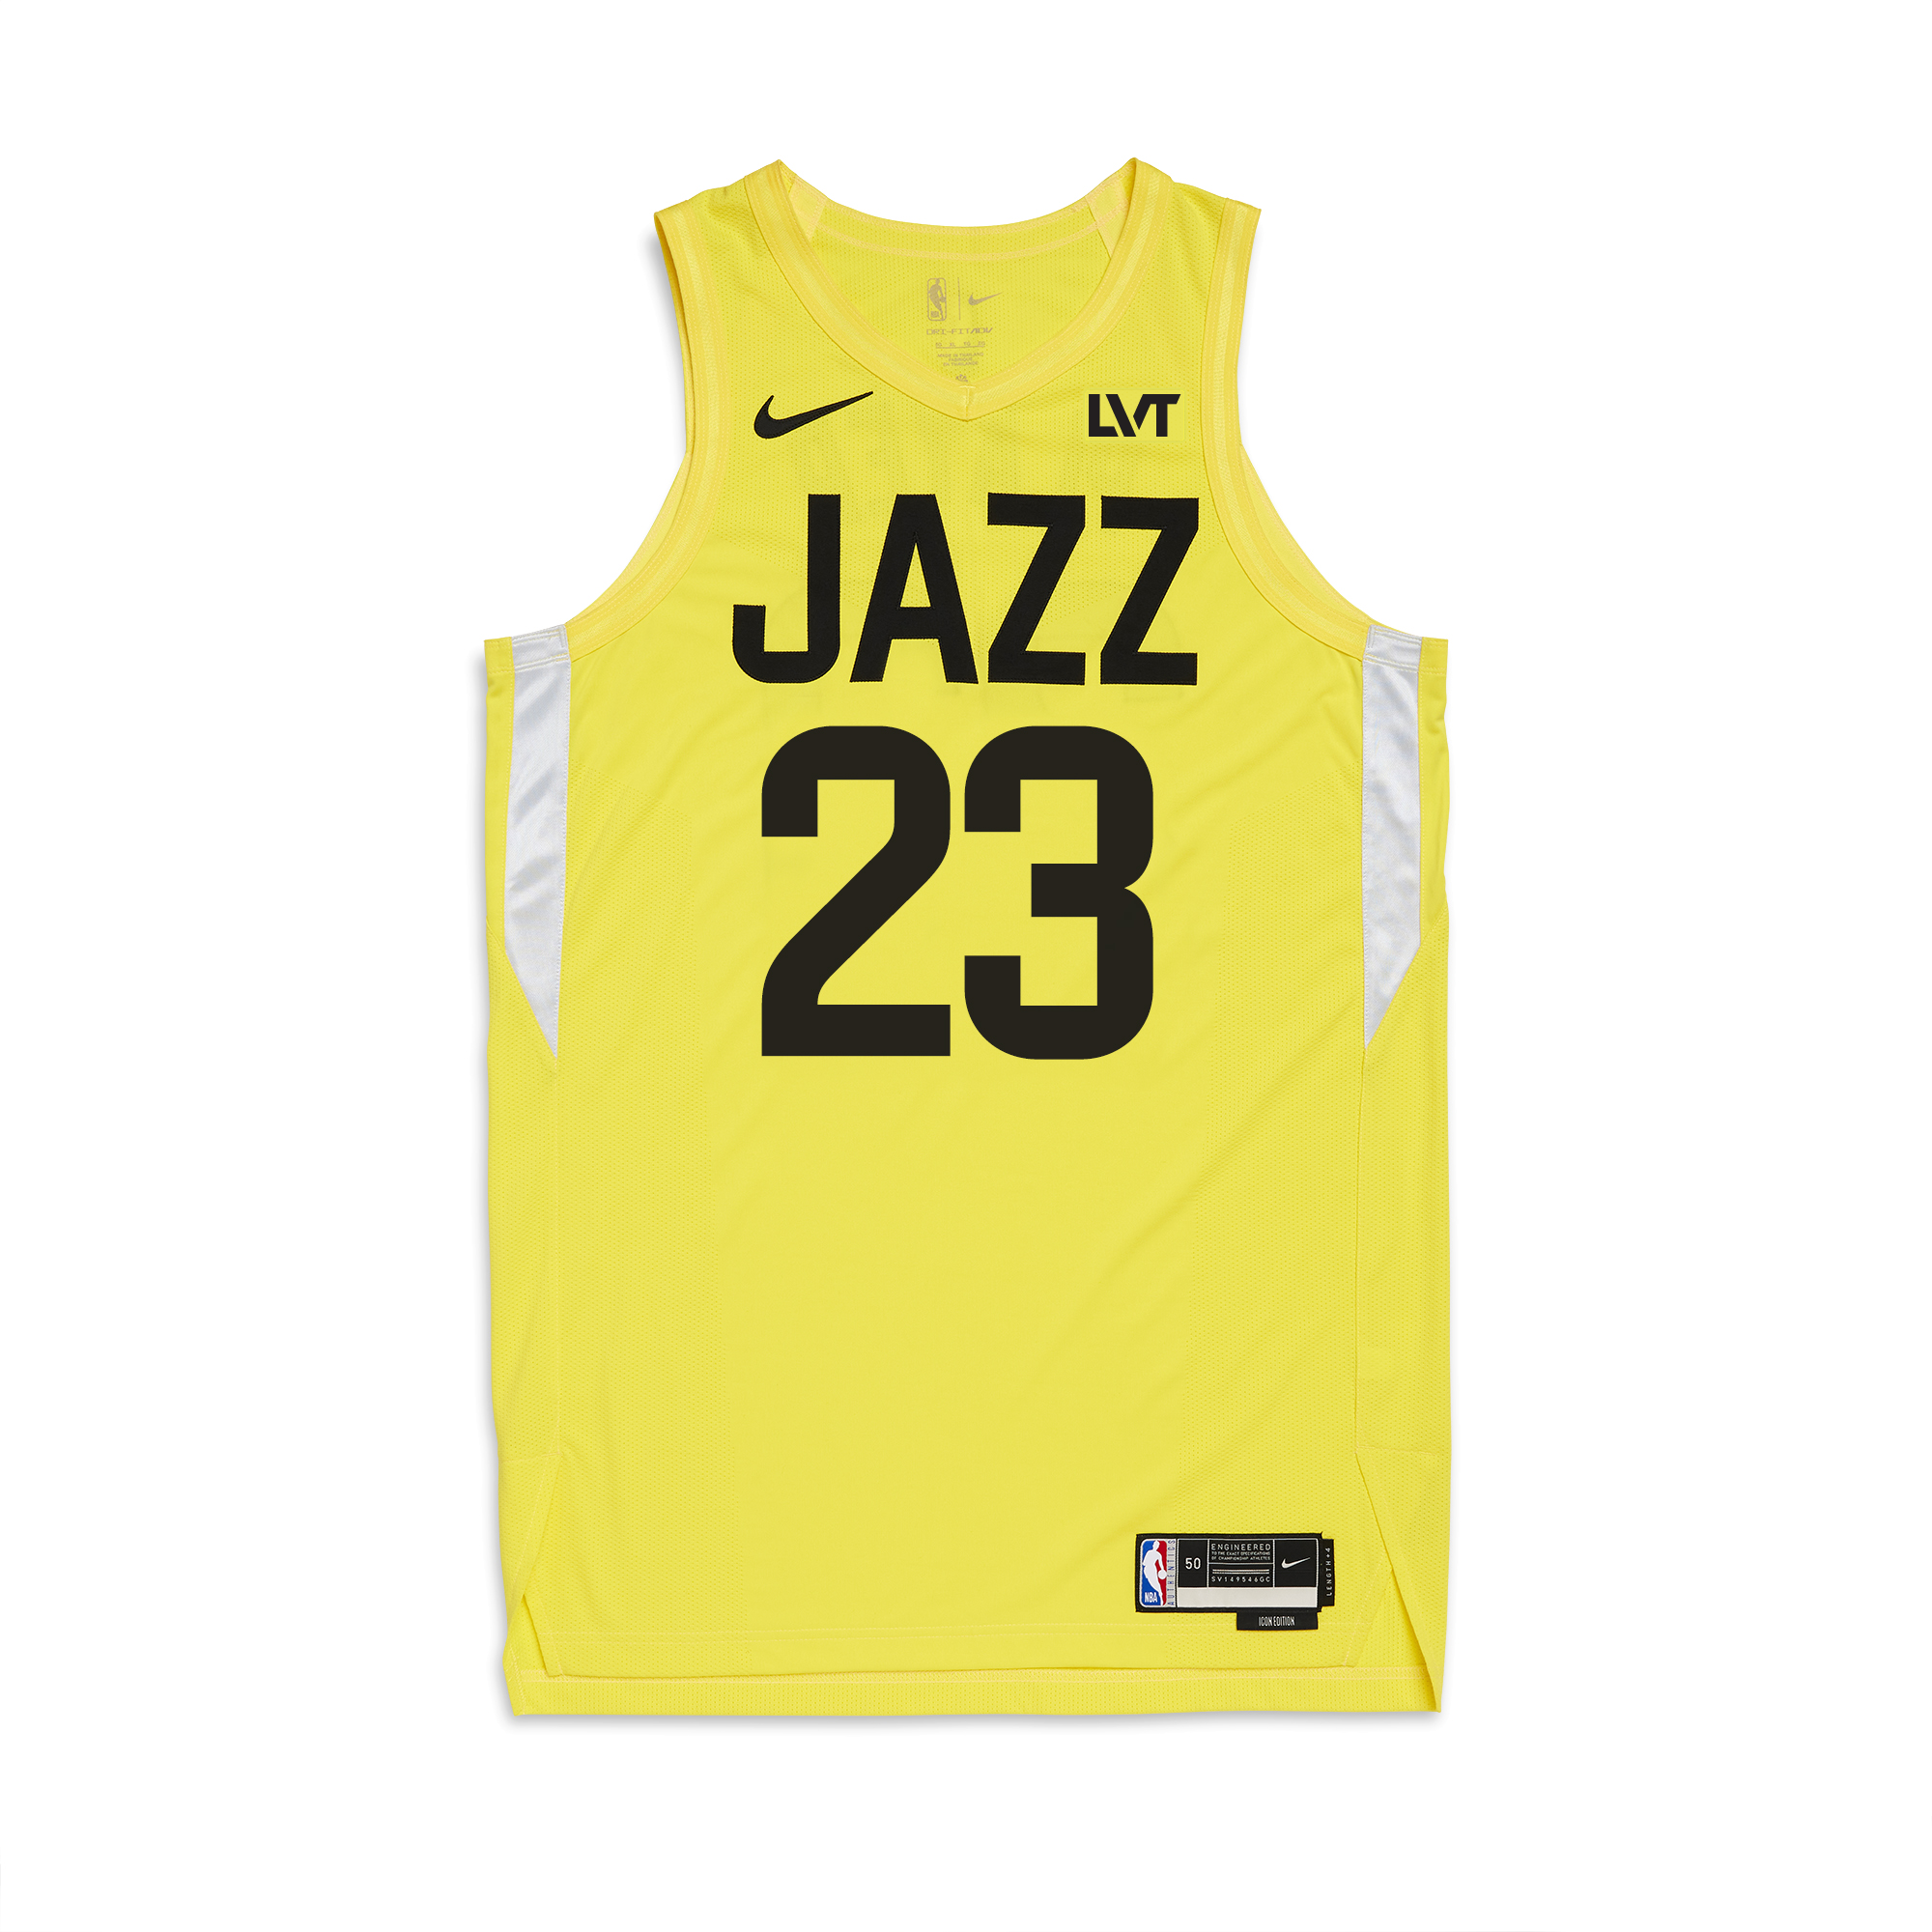 Shop Utah Jazz New Jersey with great discounts and prices online